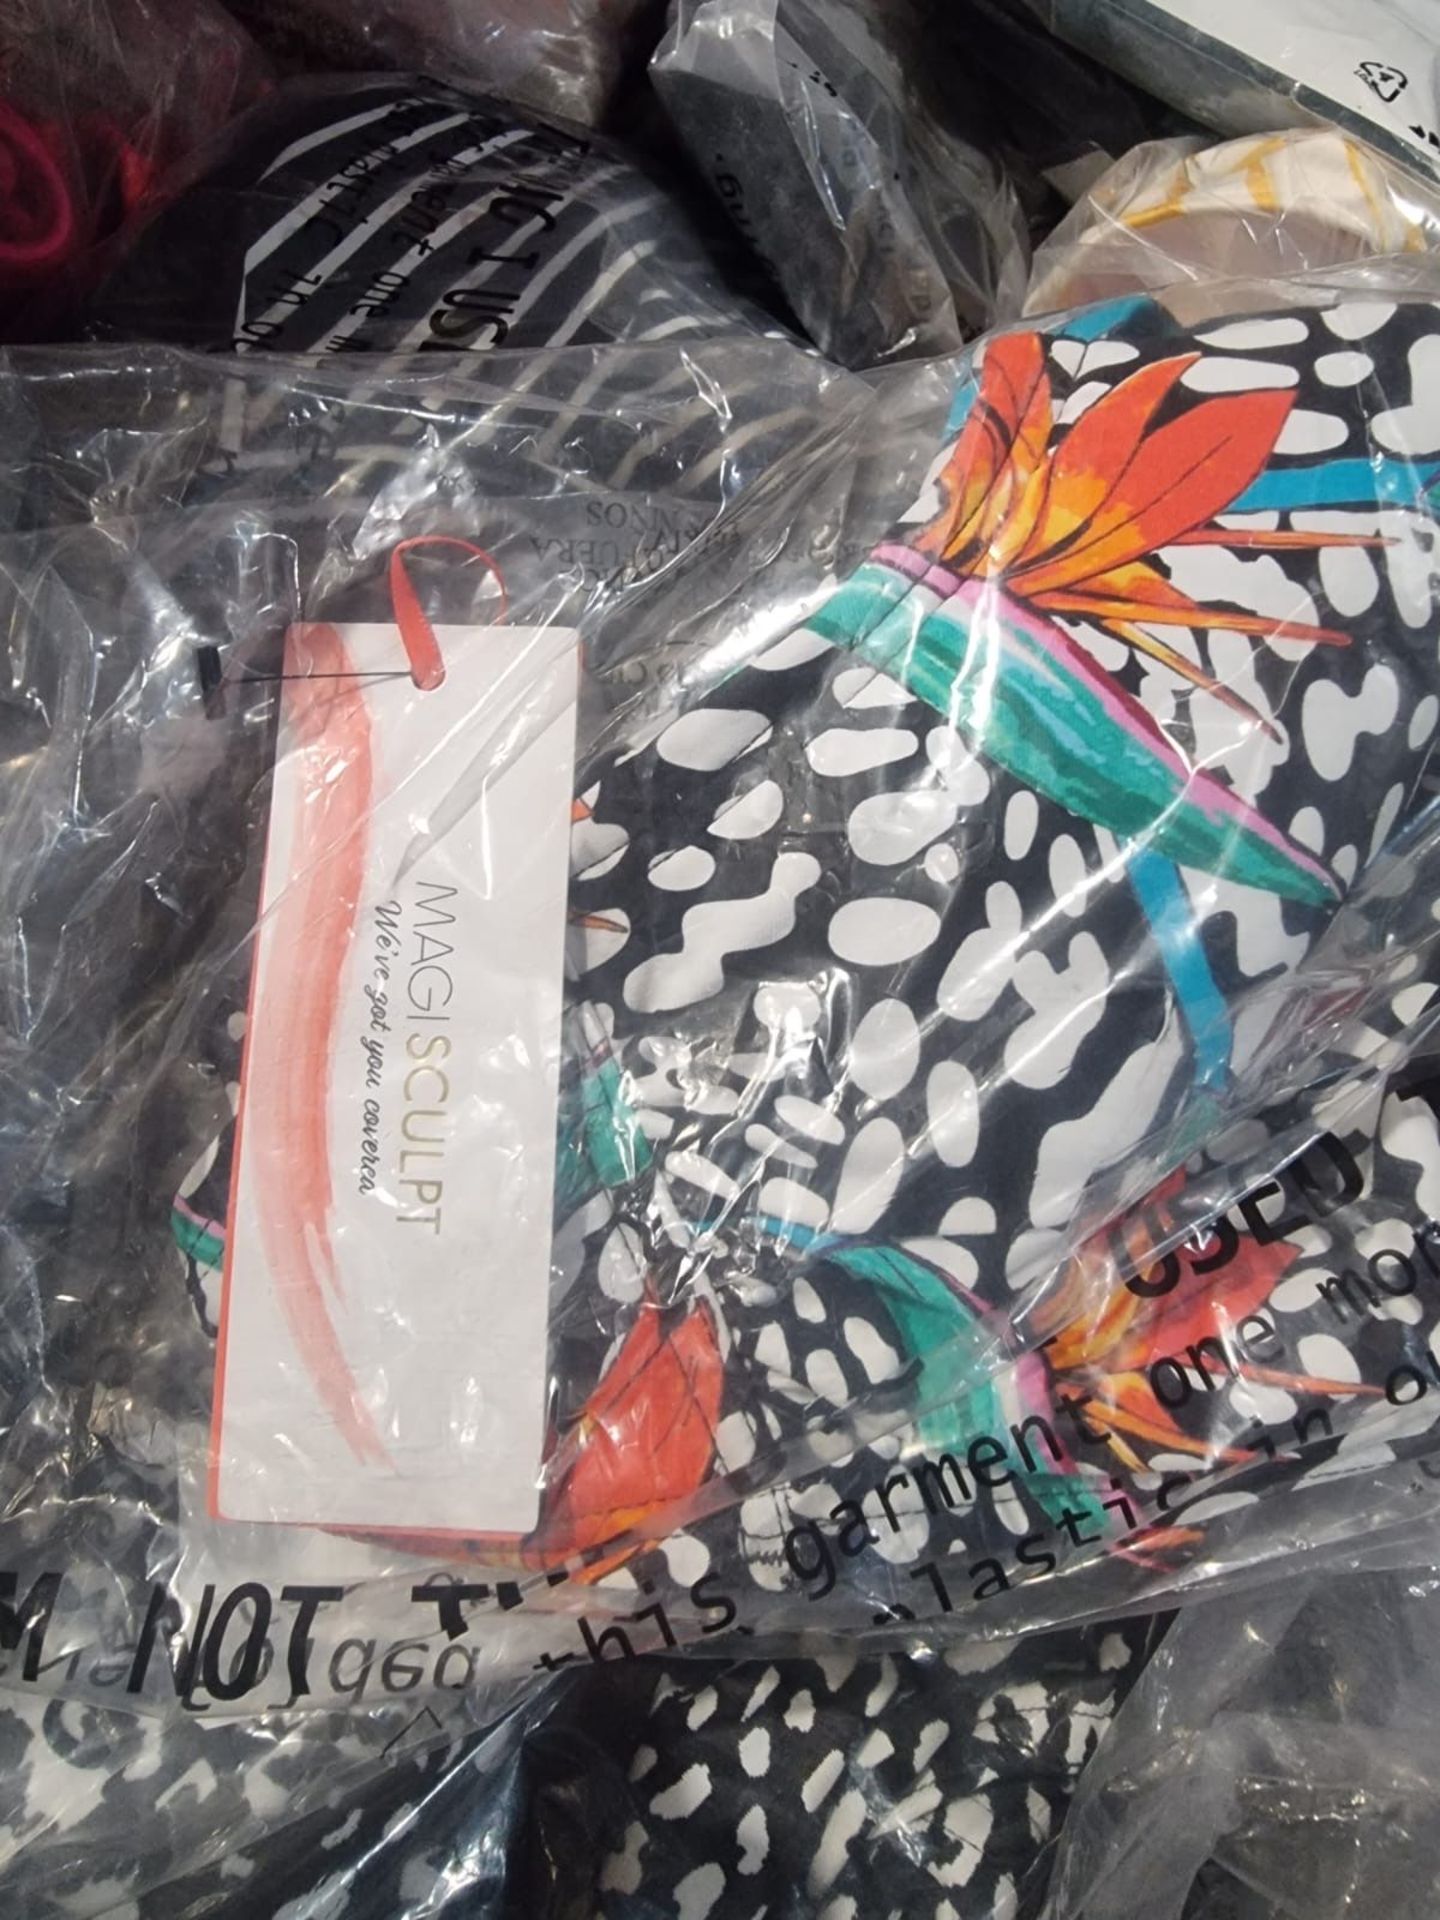 100 x NEW PACKAGED ASSORTED SWIM & UNDERWEAR FROM BRAND SUCH AS WONDERBRA, BOUX AVENUE, ANN SUMMERS, - Image 2 of 53